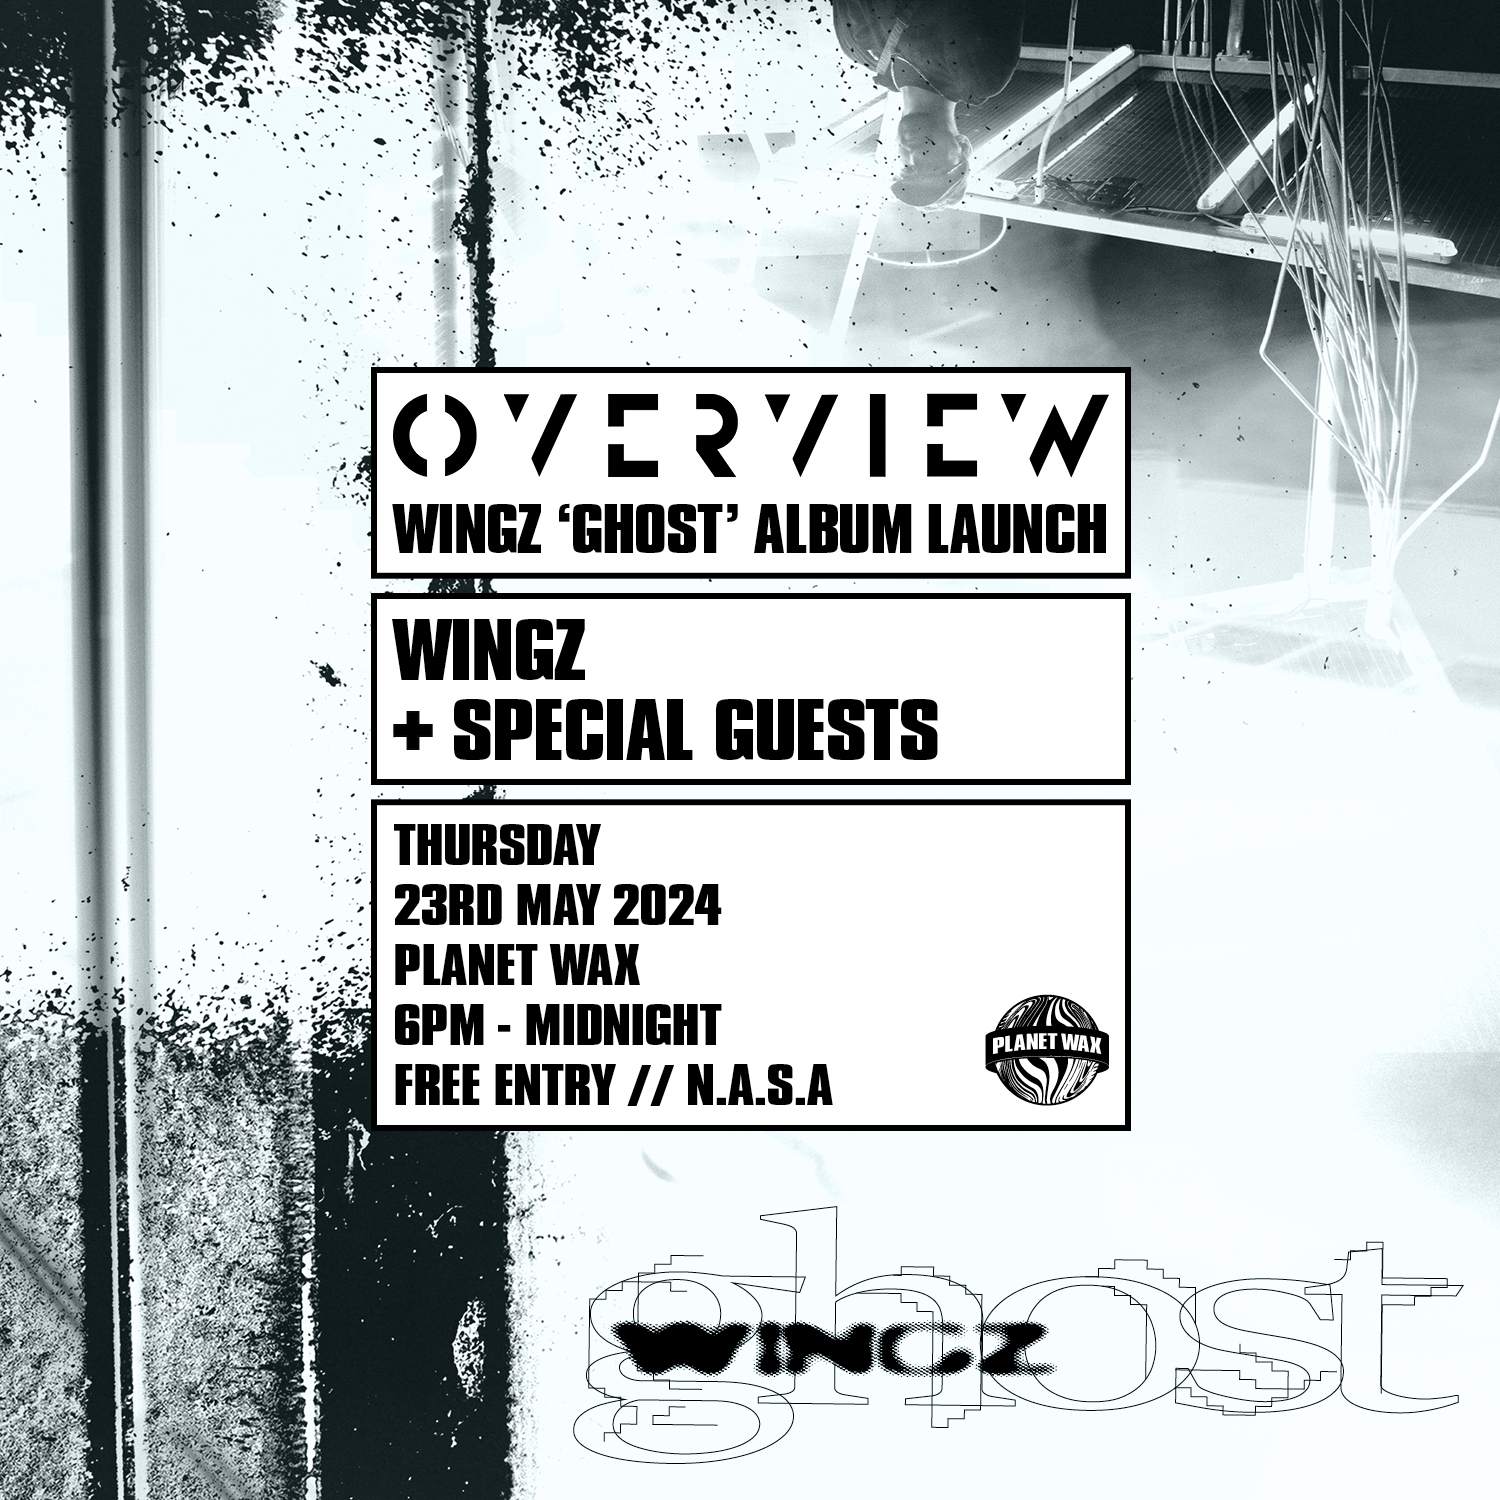 OVERVIEW: Wingz 'Ghost' Album Launch Party - Página frontal